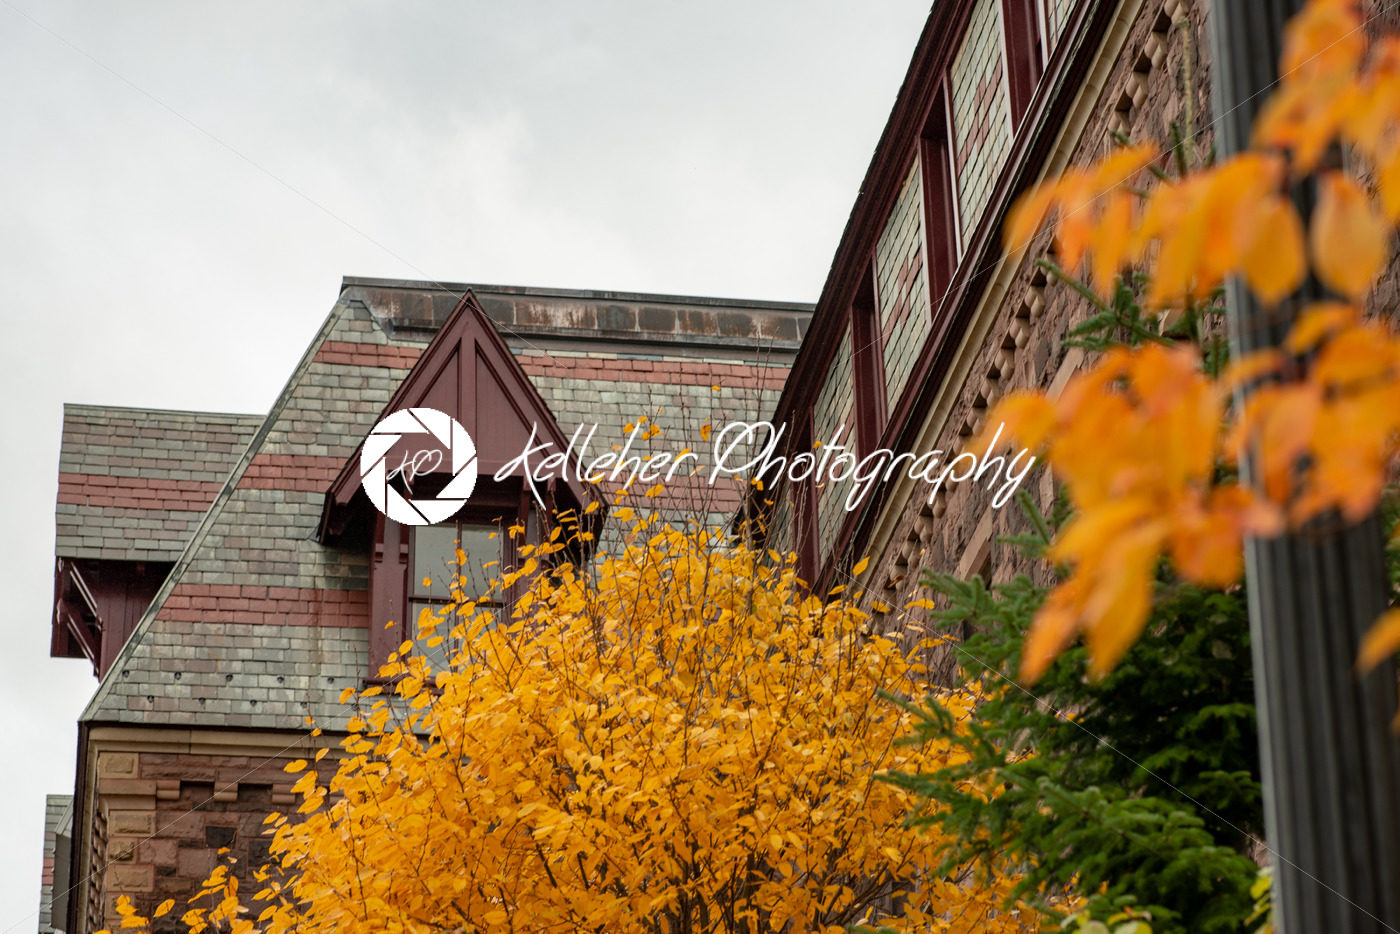 Buildings at Cornell University during peak fall time with autumn colors in Ithaca, New York - Kelleher Photography Store